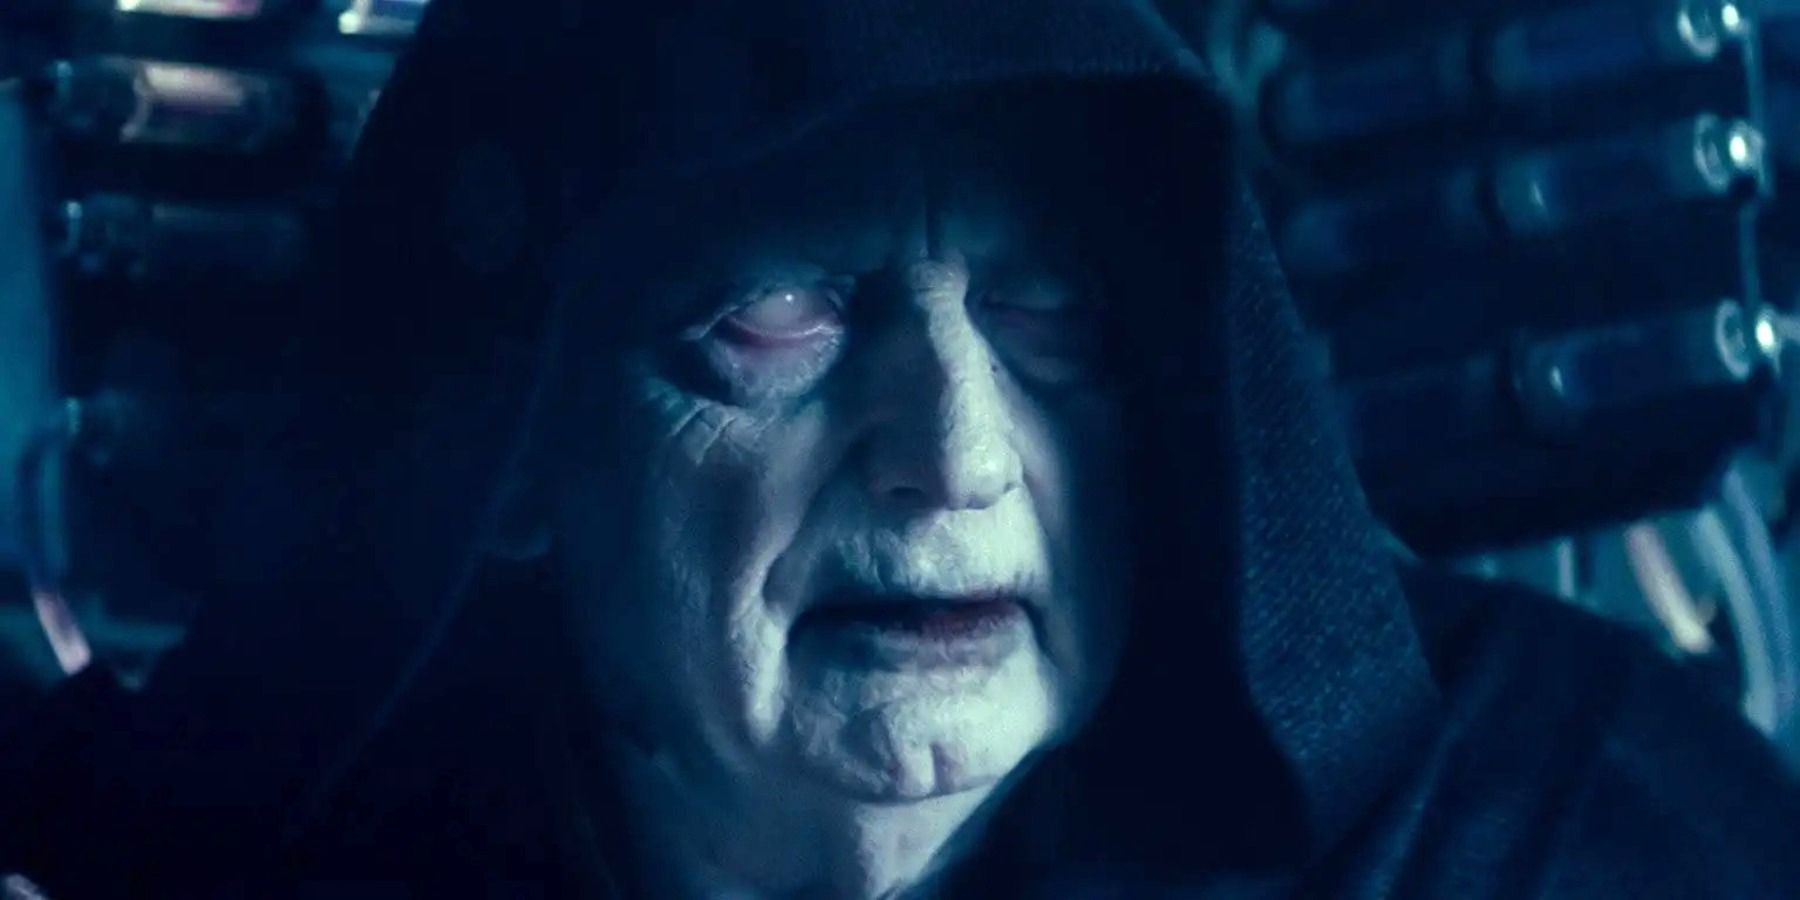 Darth Sidious or Emperor Palpatine in a robe with foggy eyes